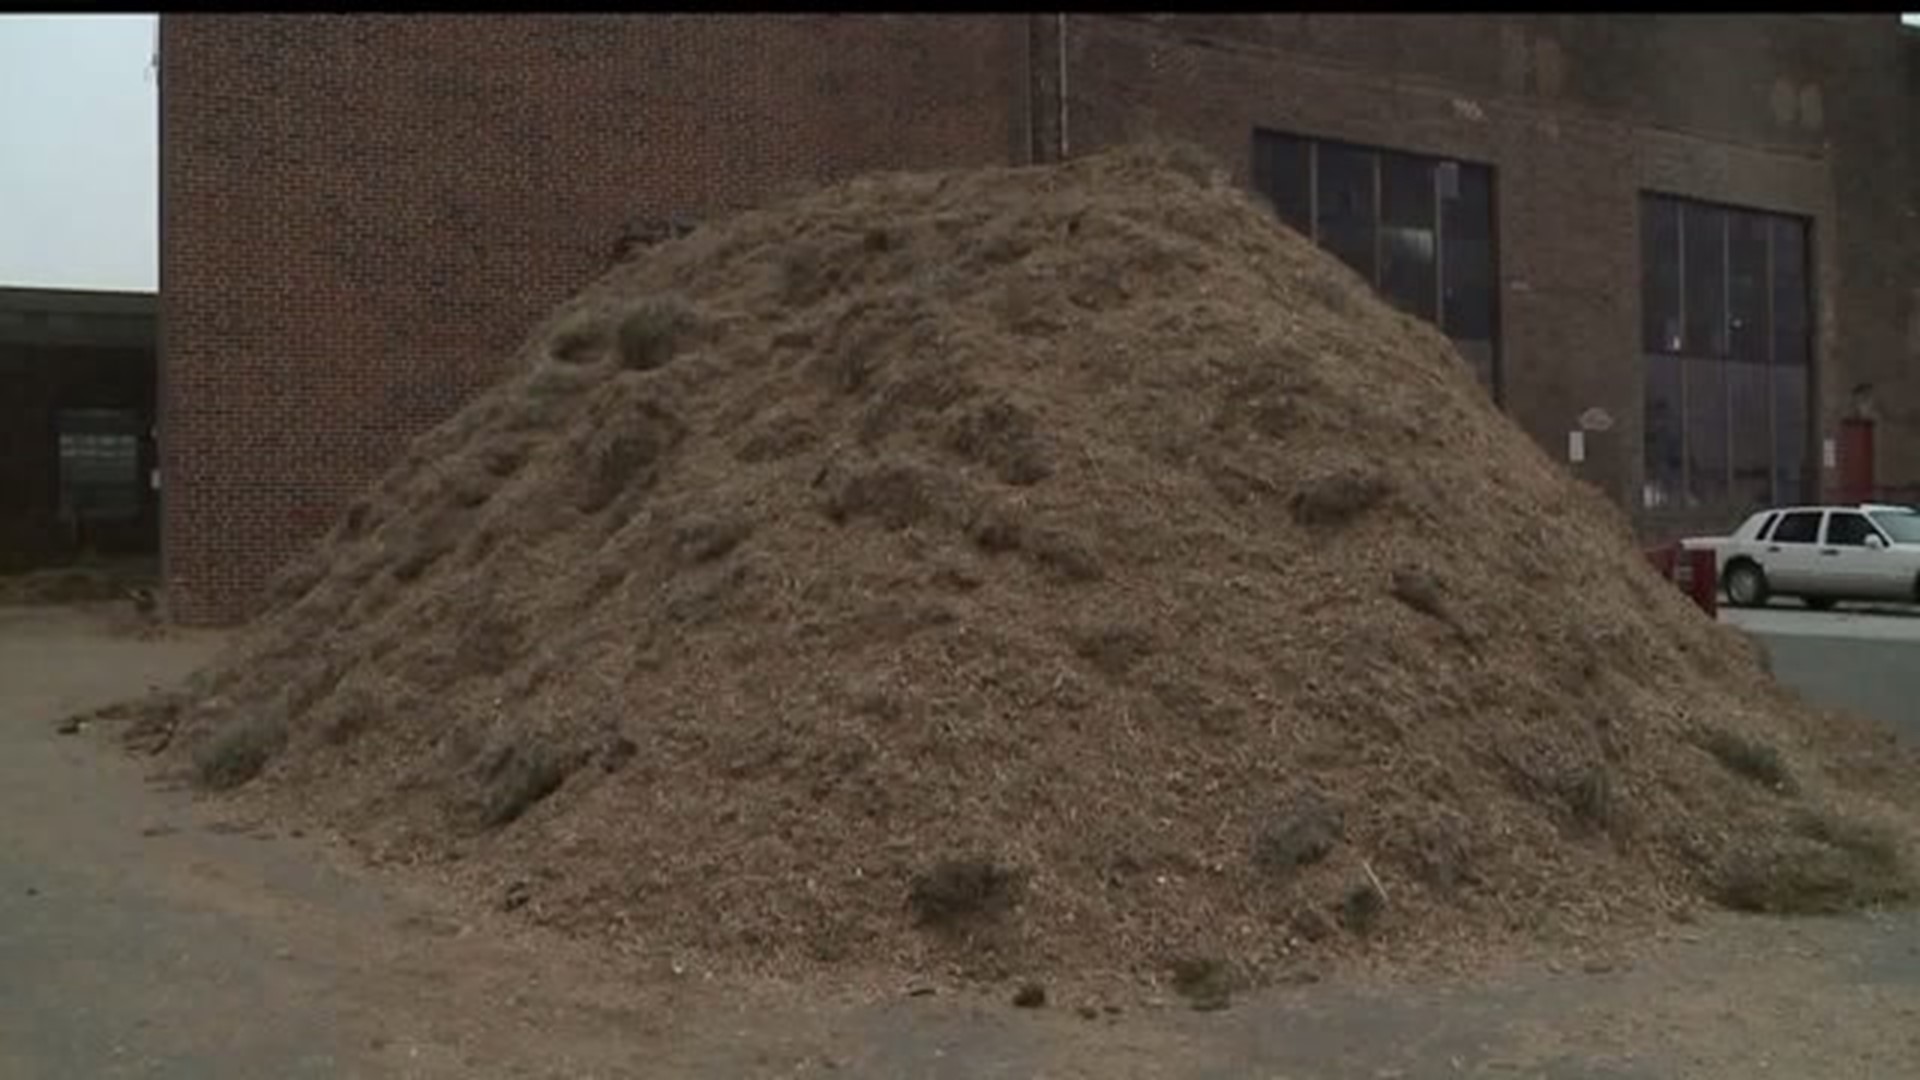 Get the scoop on the poop at the PA Farm Show